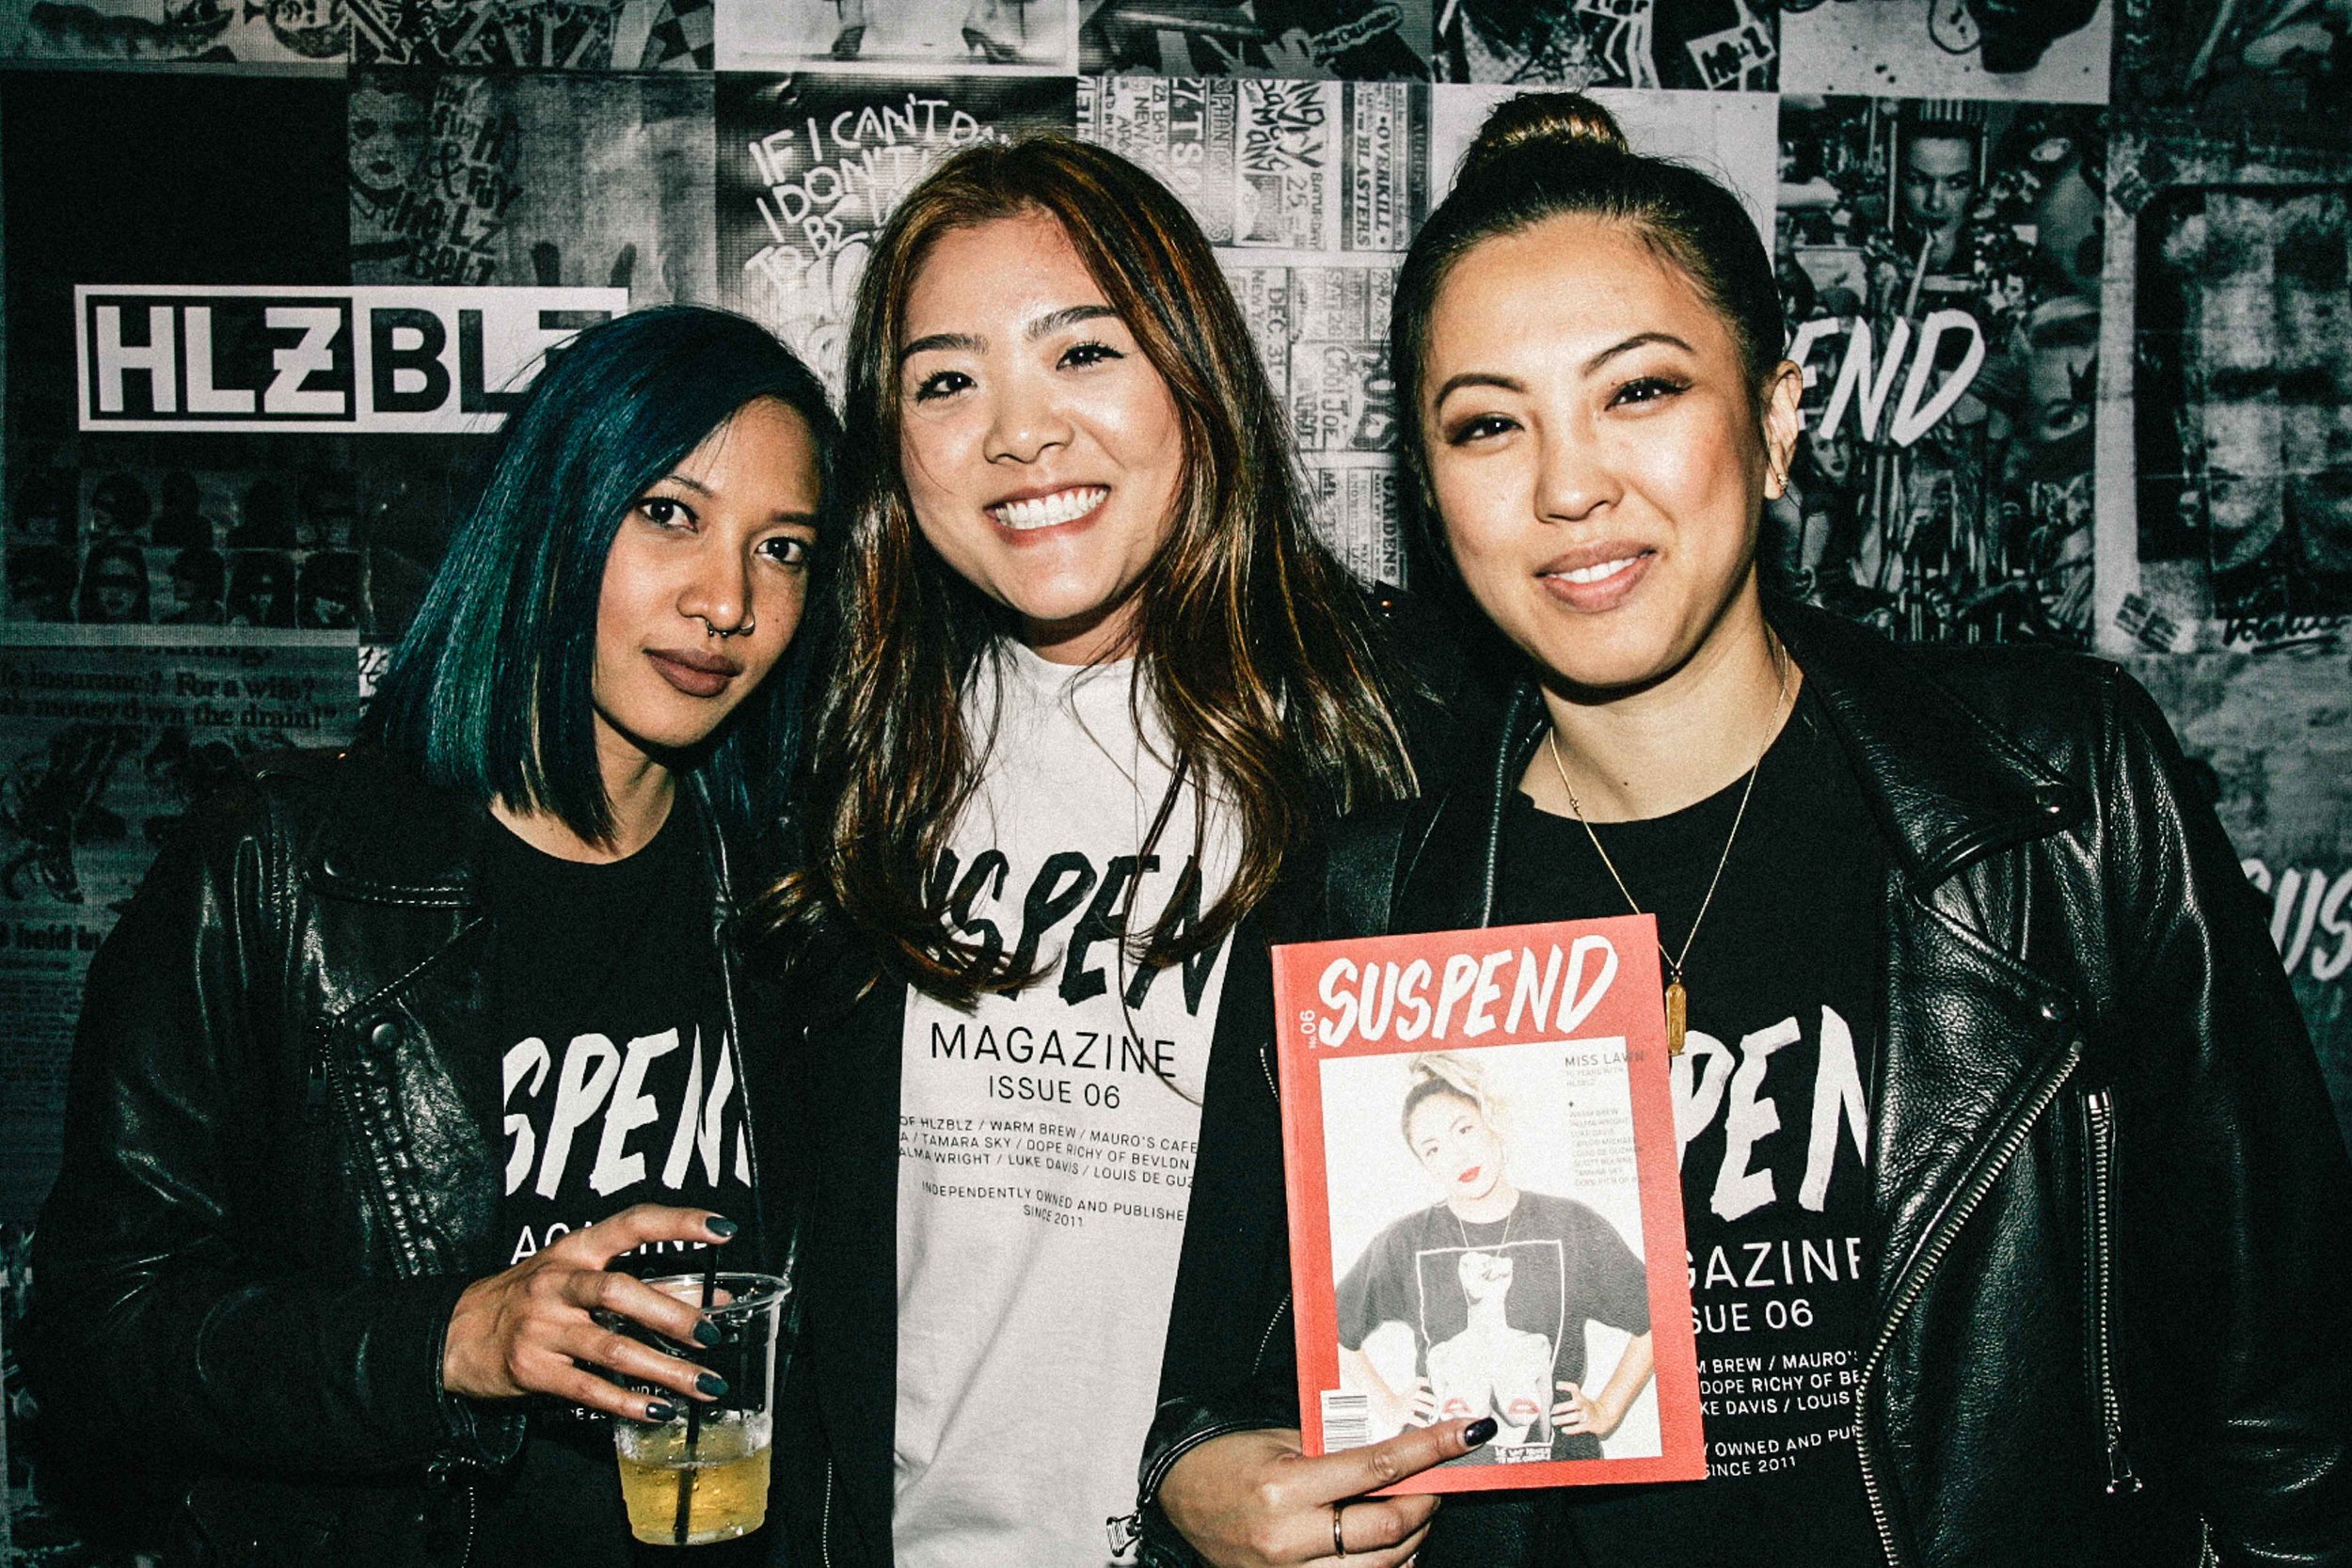  Leslie Corpuz, Hannah Song, and EIC Diane Abapo at the ISSUE 06 Release Party x 10YR HLZBLZ Anniversary (Feb 11) at Globe Theater. / Photo: © Jonathan Tate for SUSPEND Magazine. 